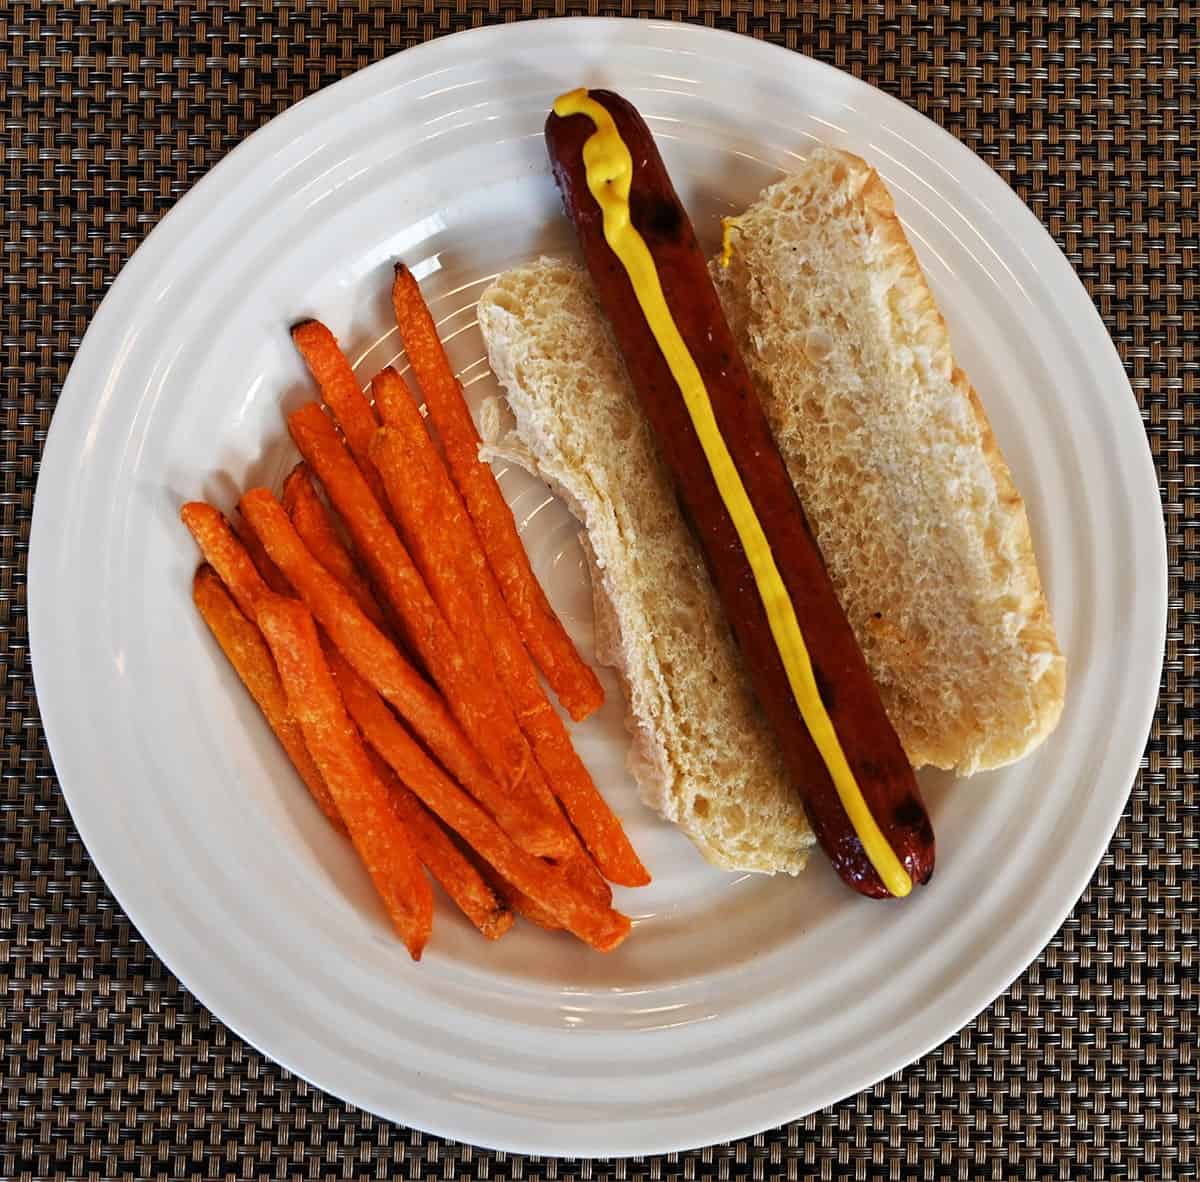 Cooked Costco Polish Sausage on a bun with sweet potato fries beside it served on a white plate. 